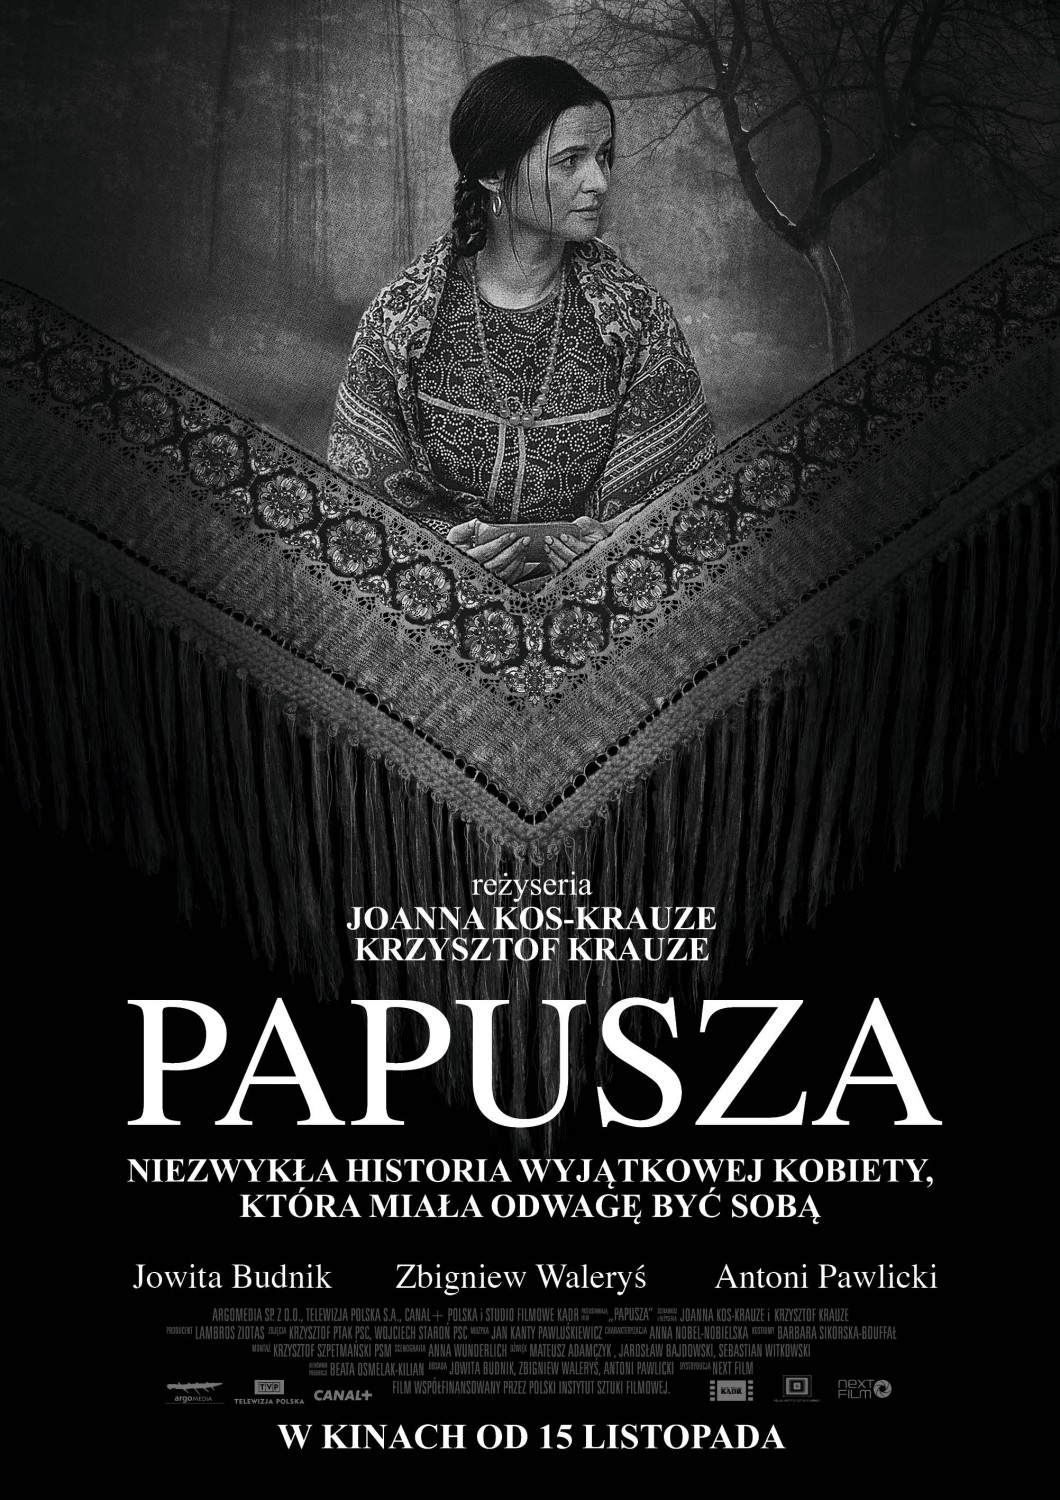 Extra Large Movie Poster Image for Papusza 